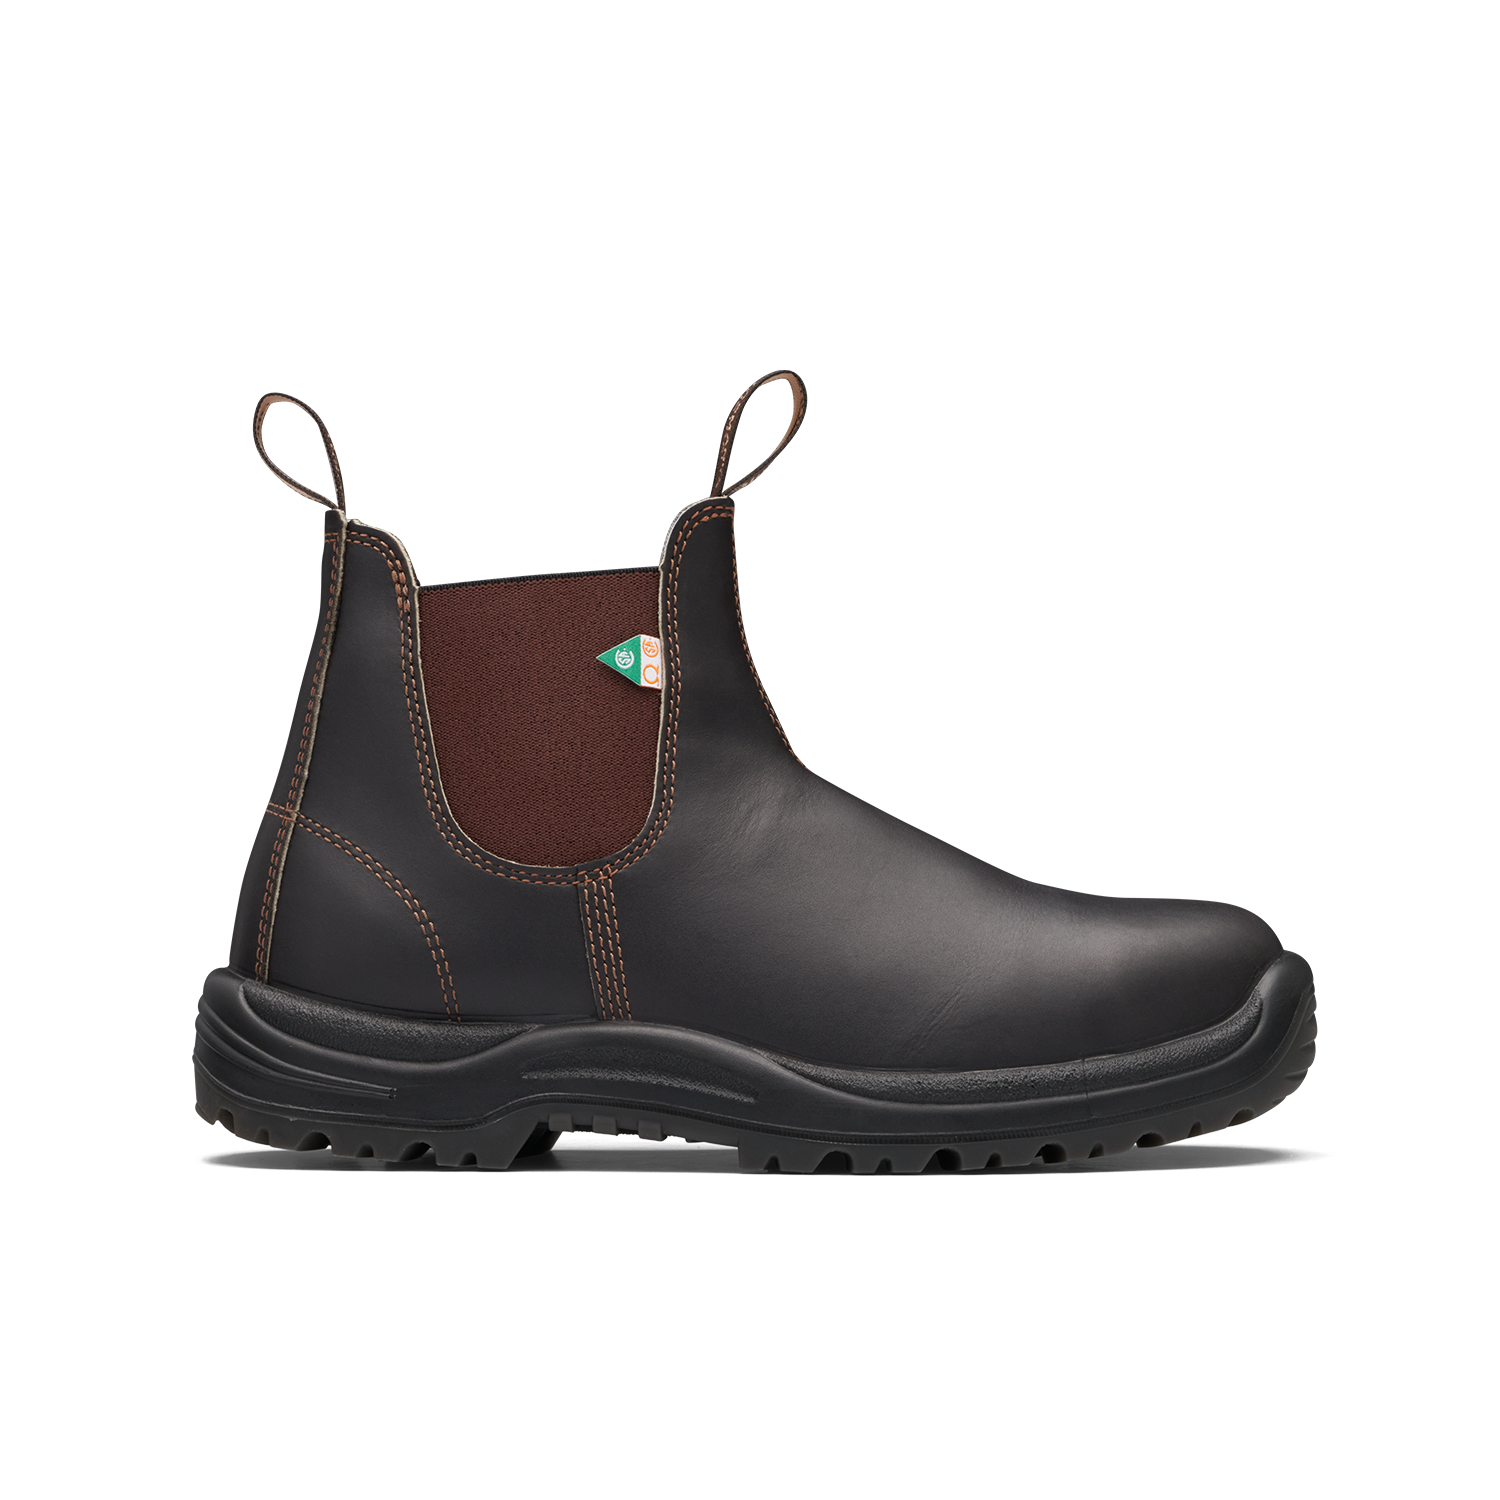 Blundstone 162 Work & Safety Boot Stout Brown